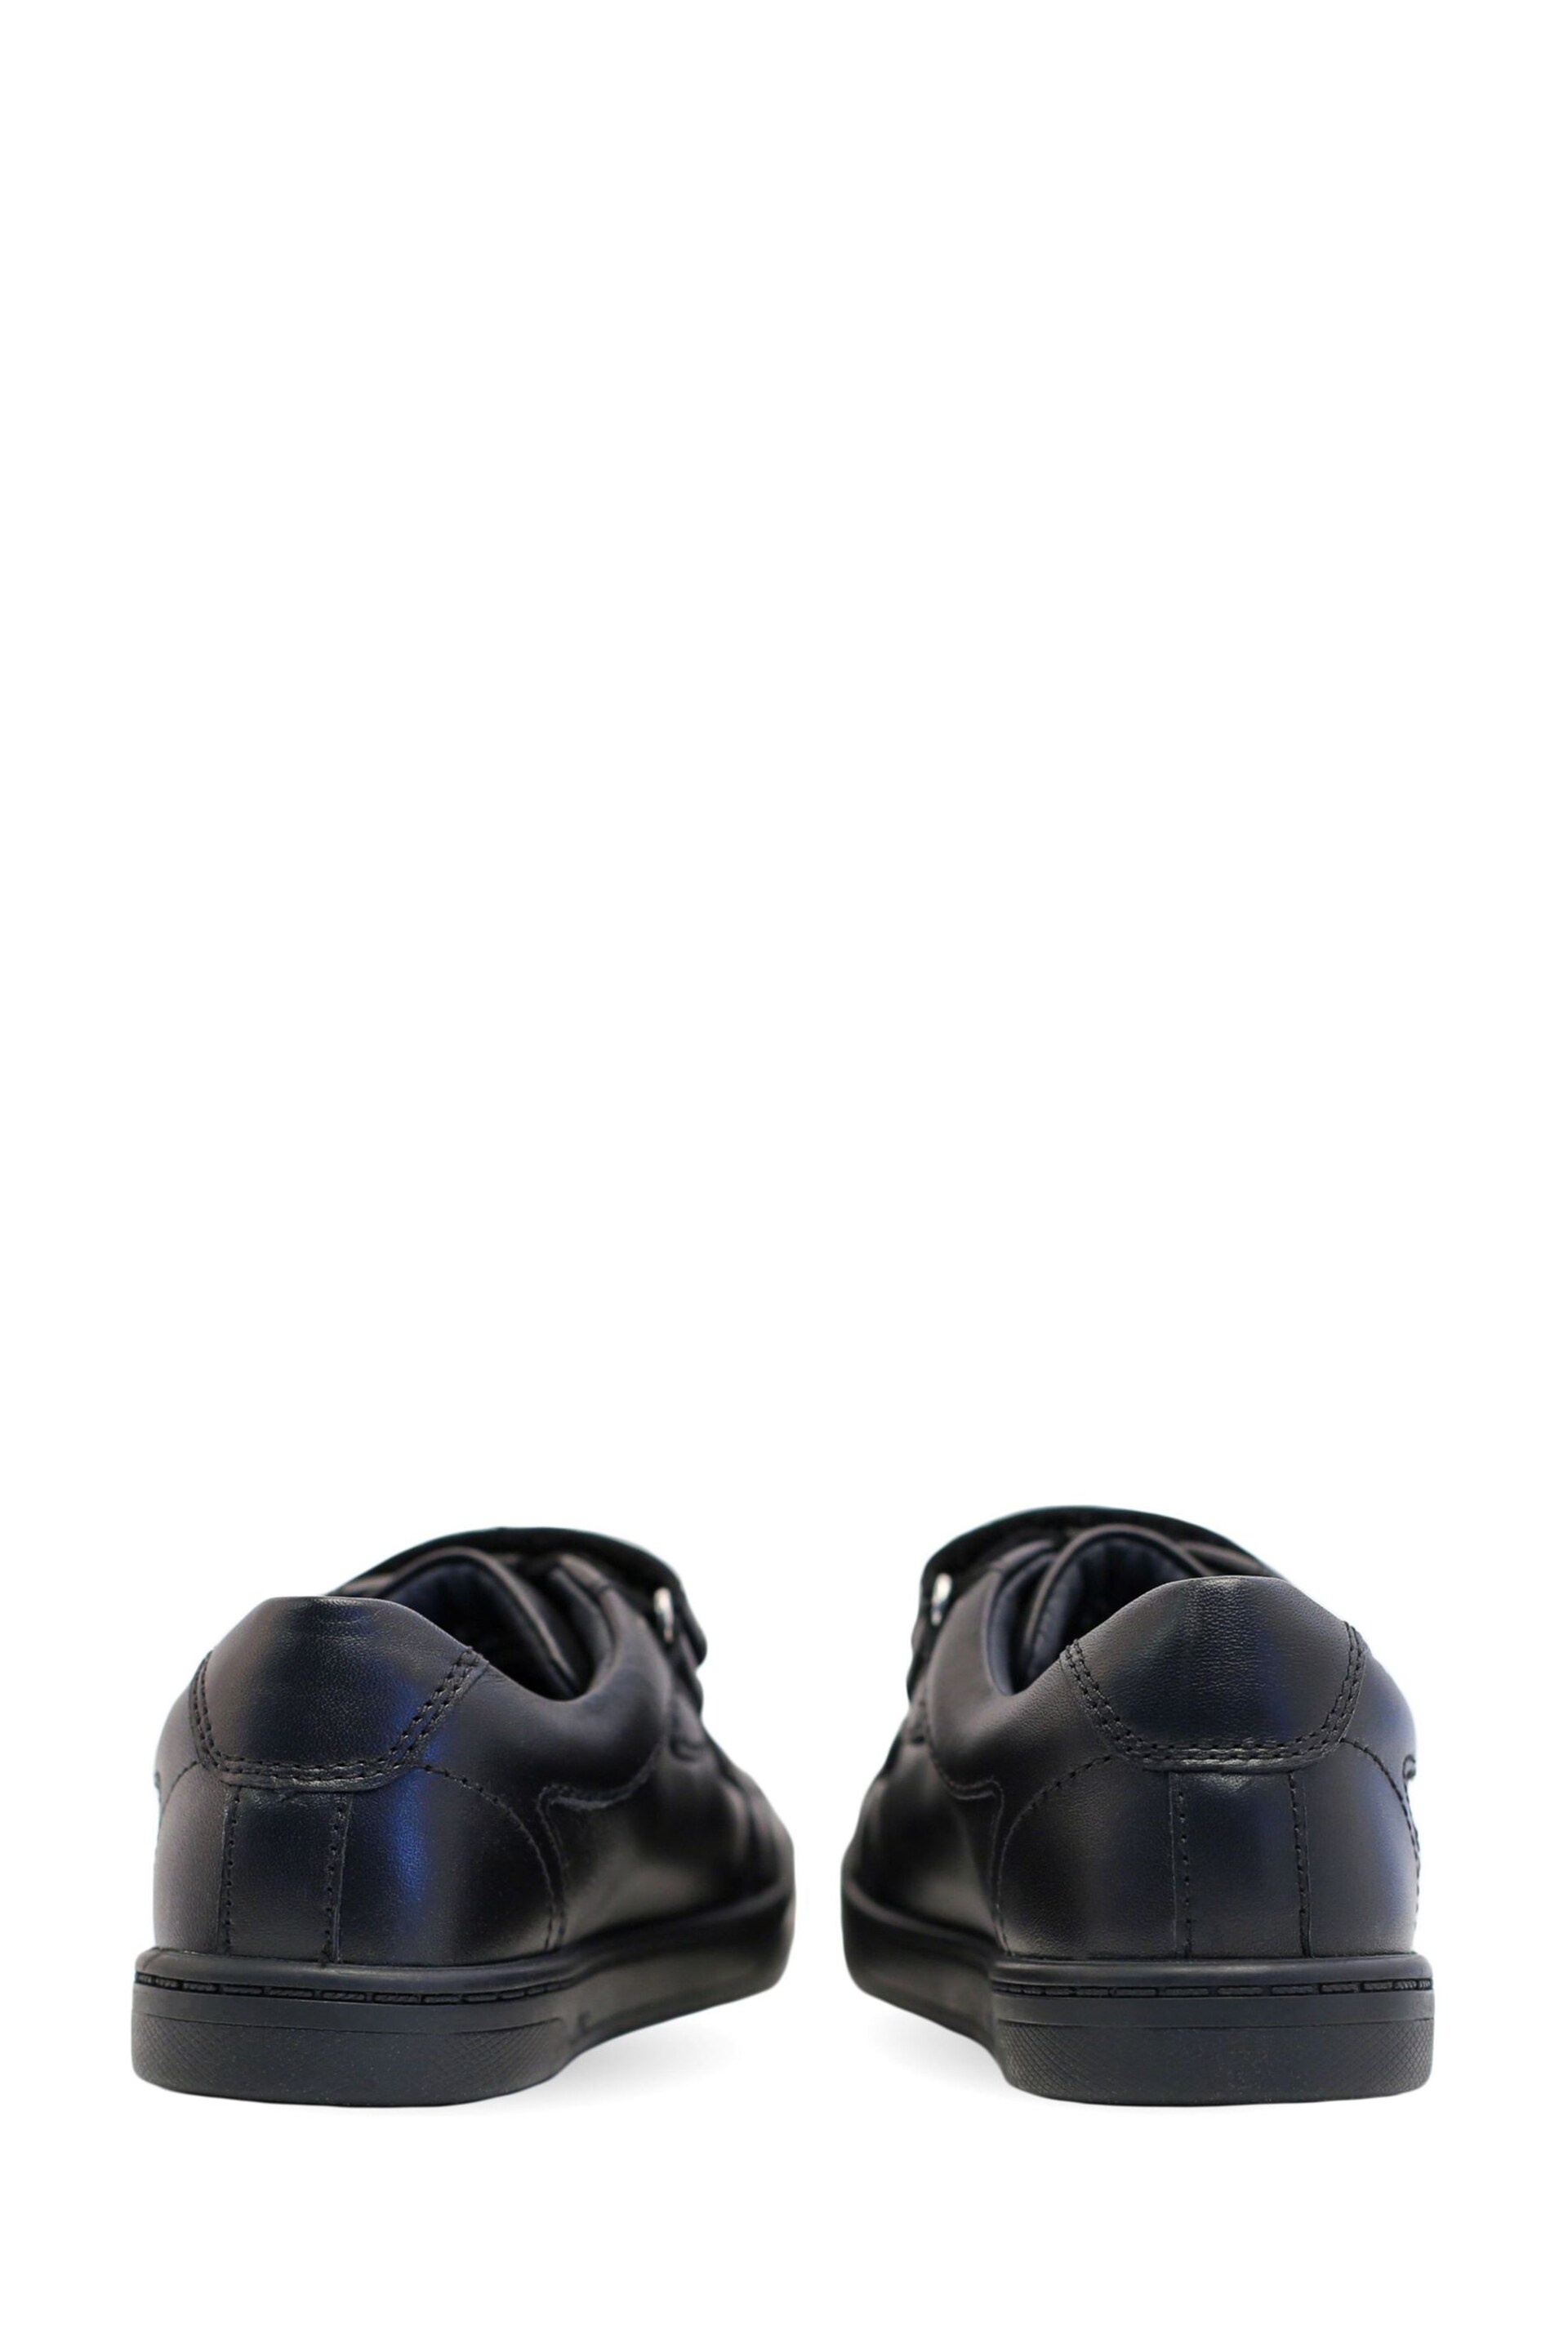 Start-Rite Explore Rip-Tape Black Leather Comfy School Shoes F Fit - Image 5 of 7